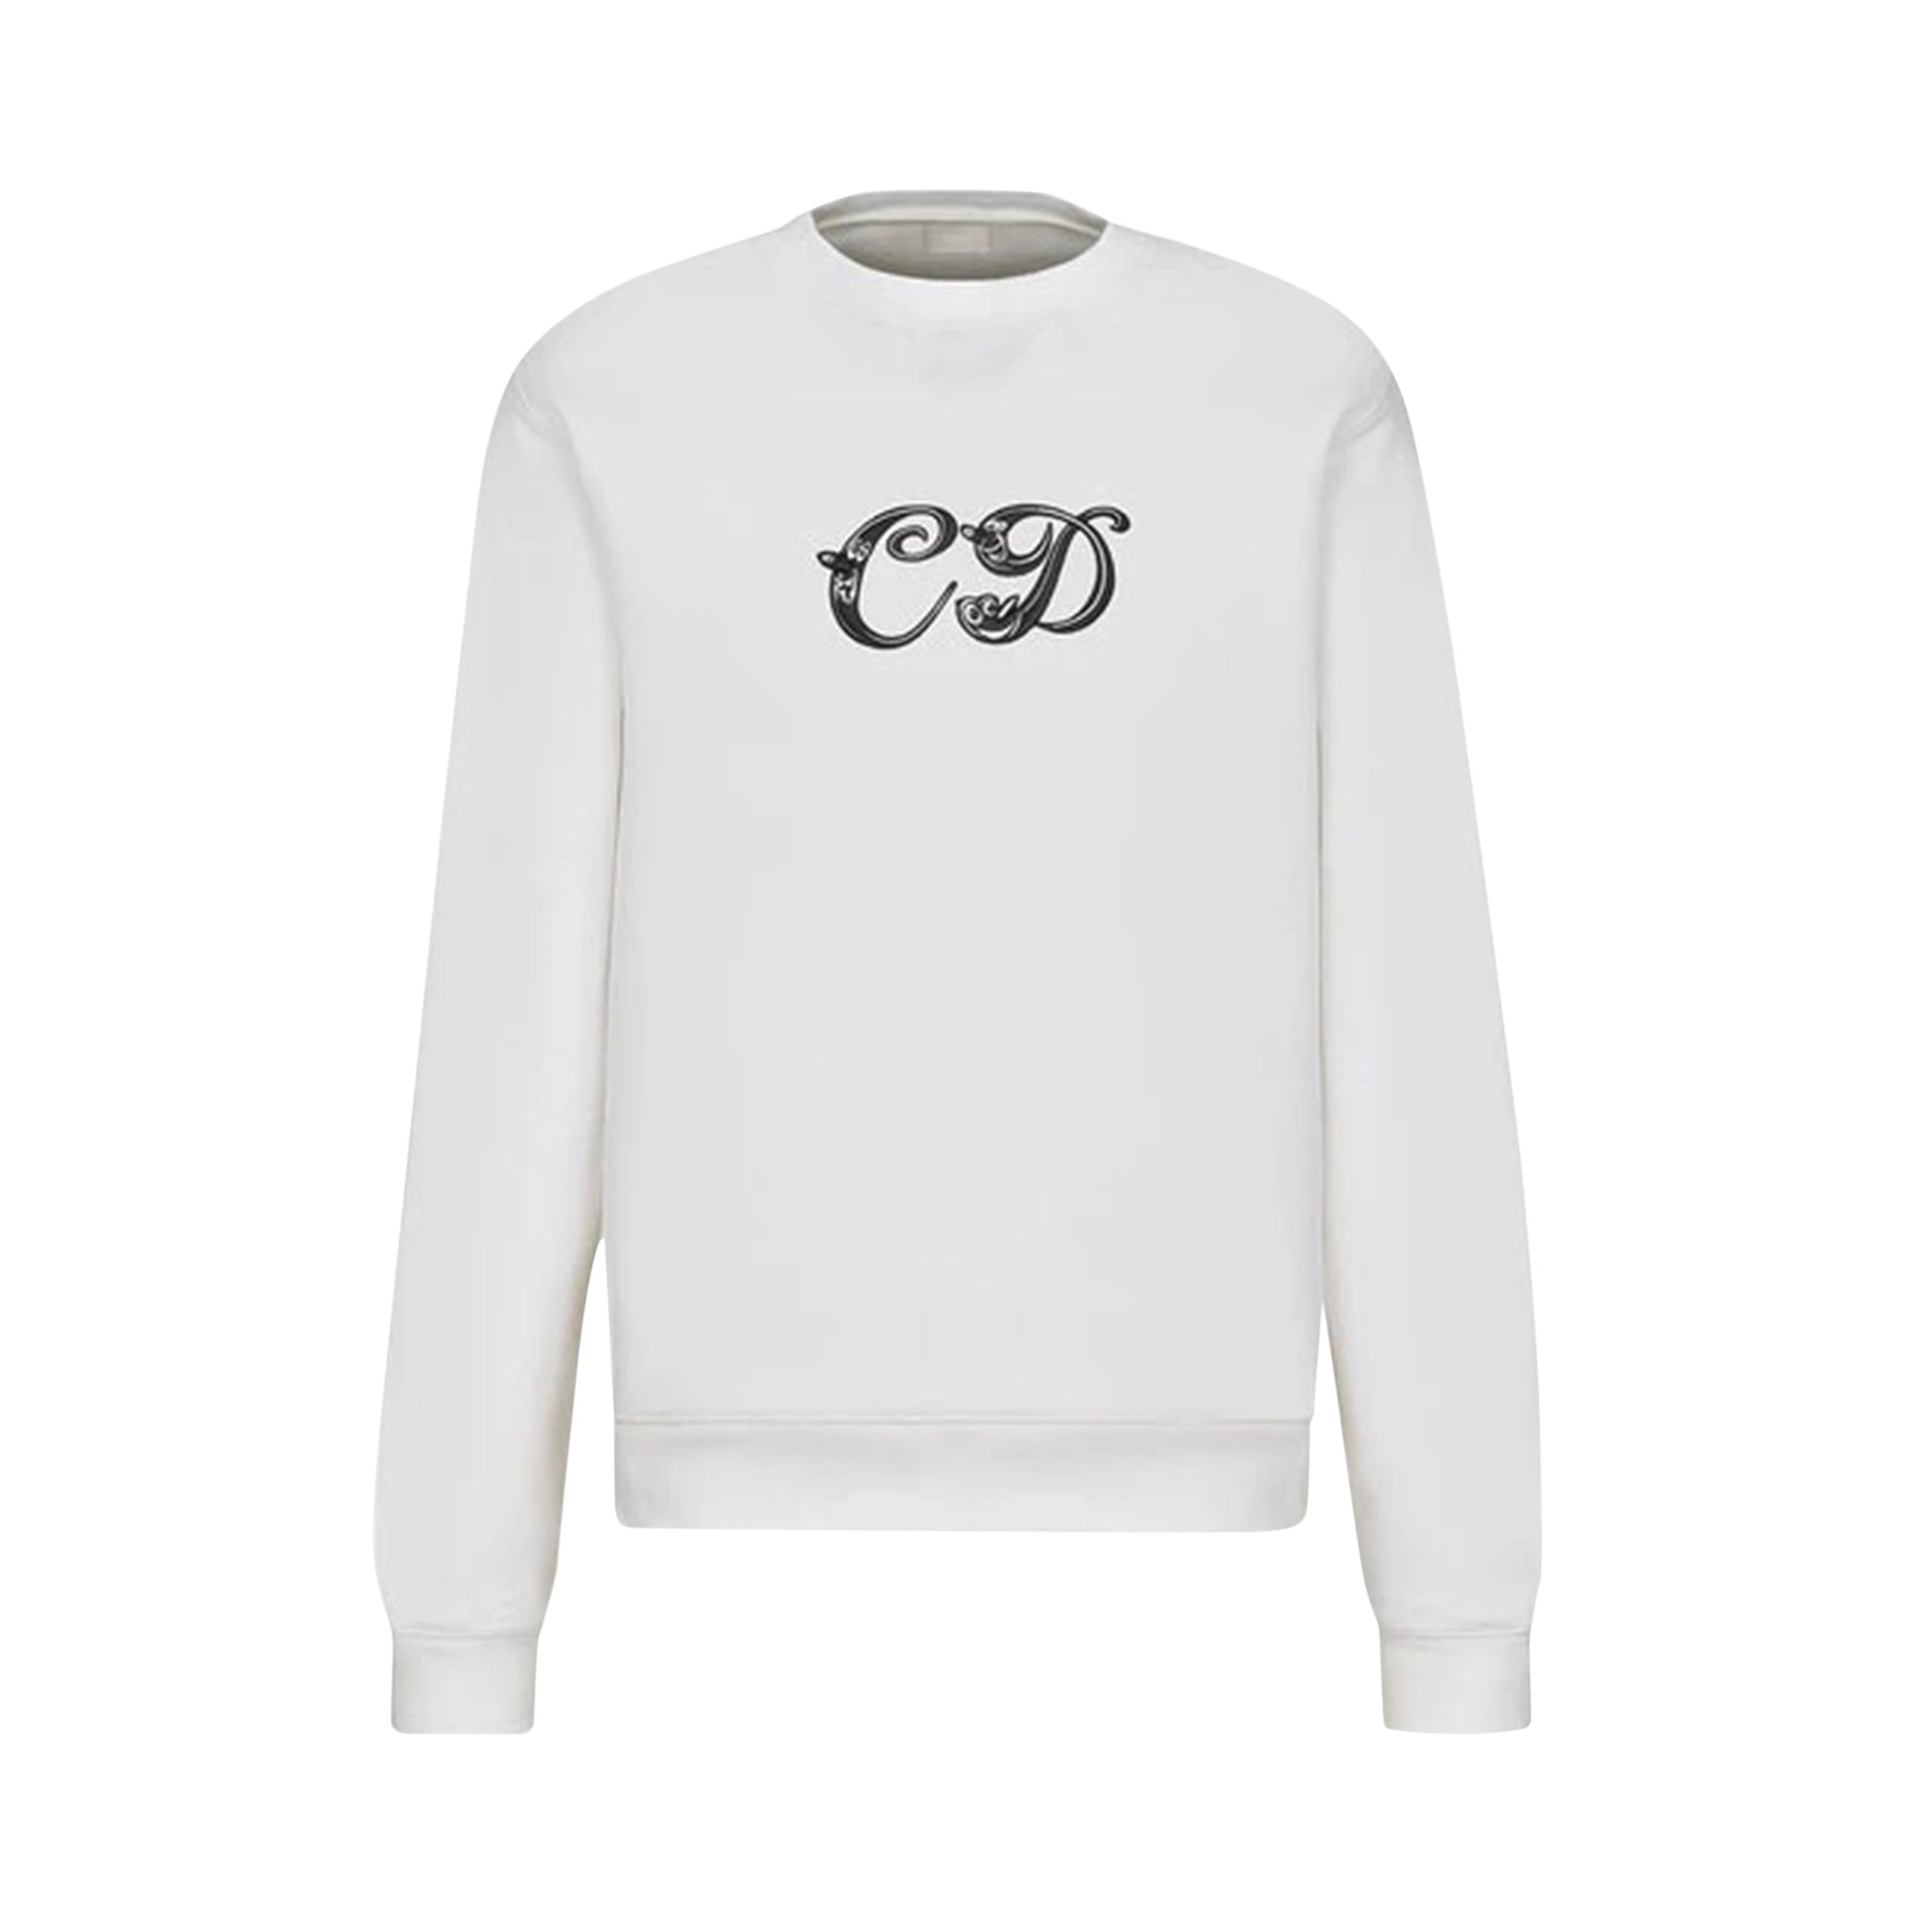 Buy Dior x Kenny Scharf CD Embroidery Crew 'White' - 193J687A0531 ...